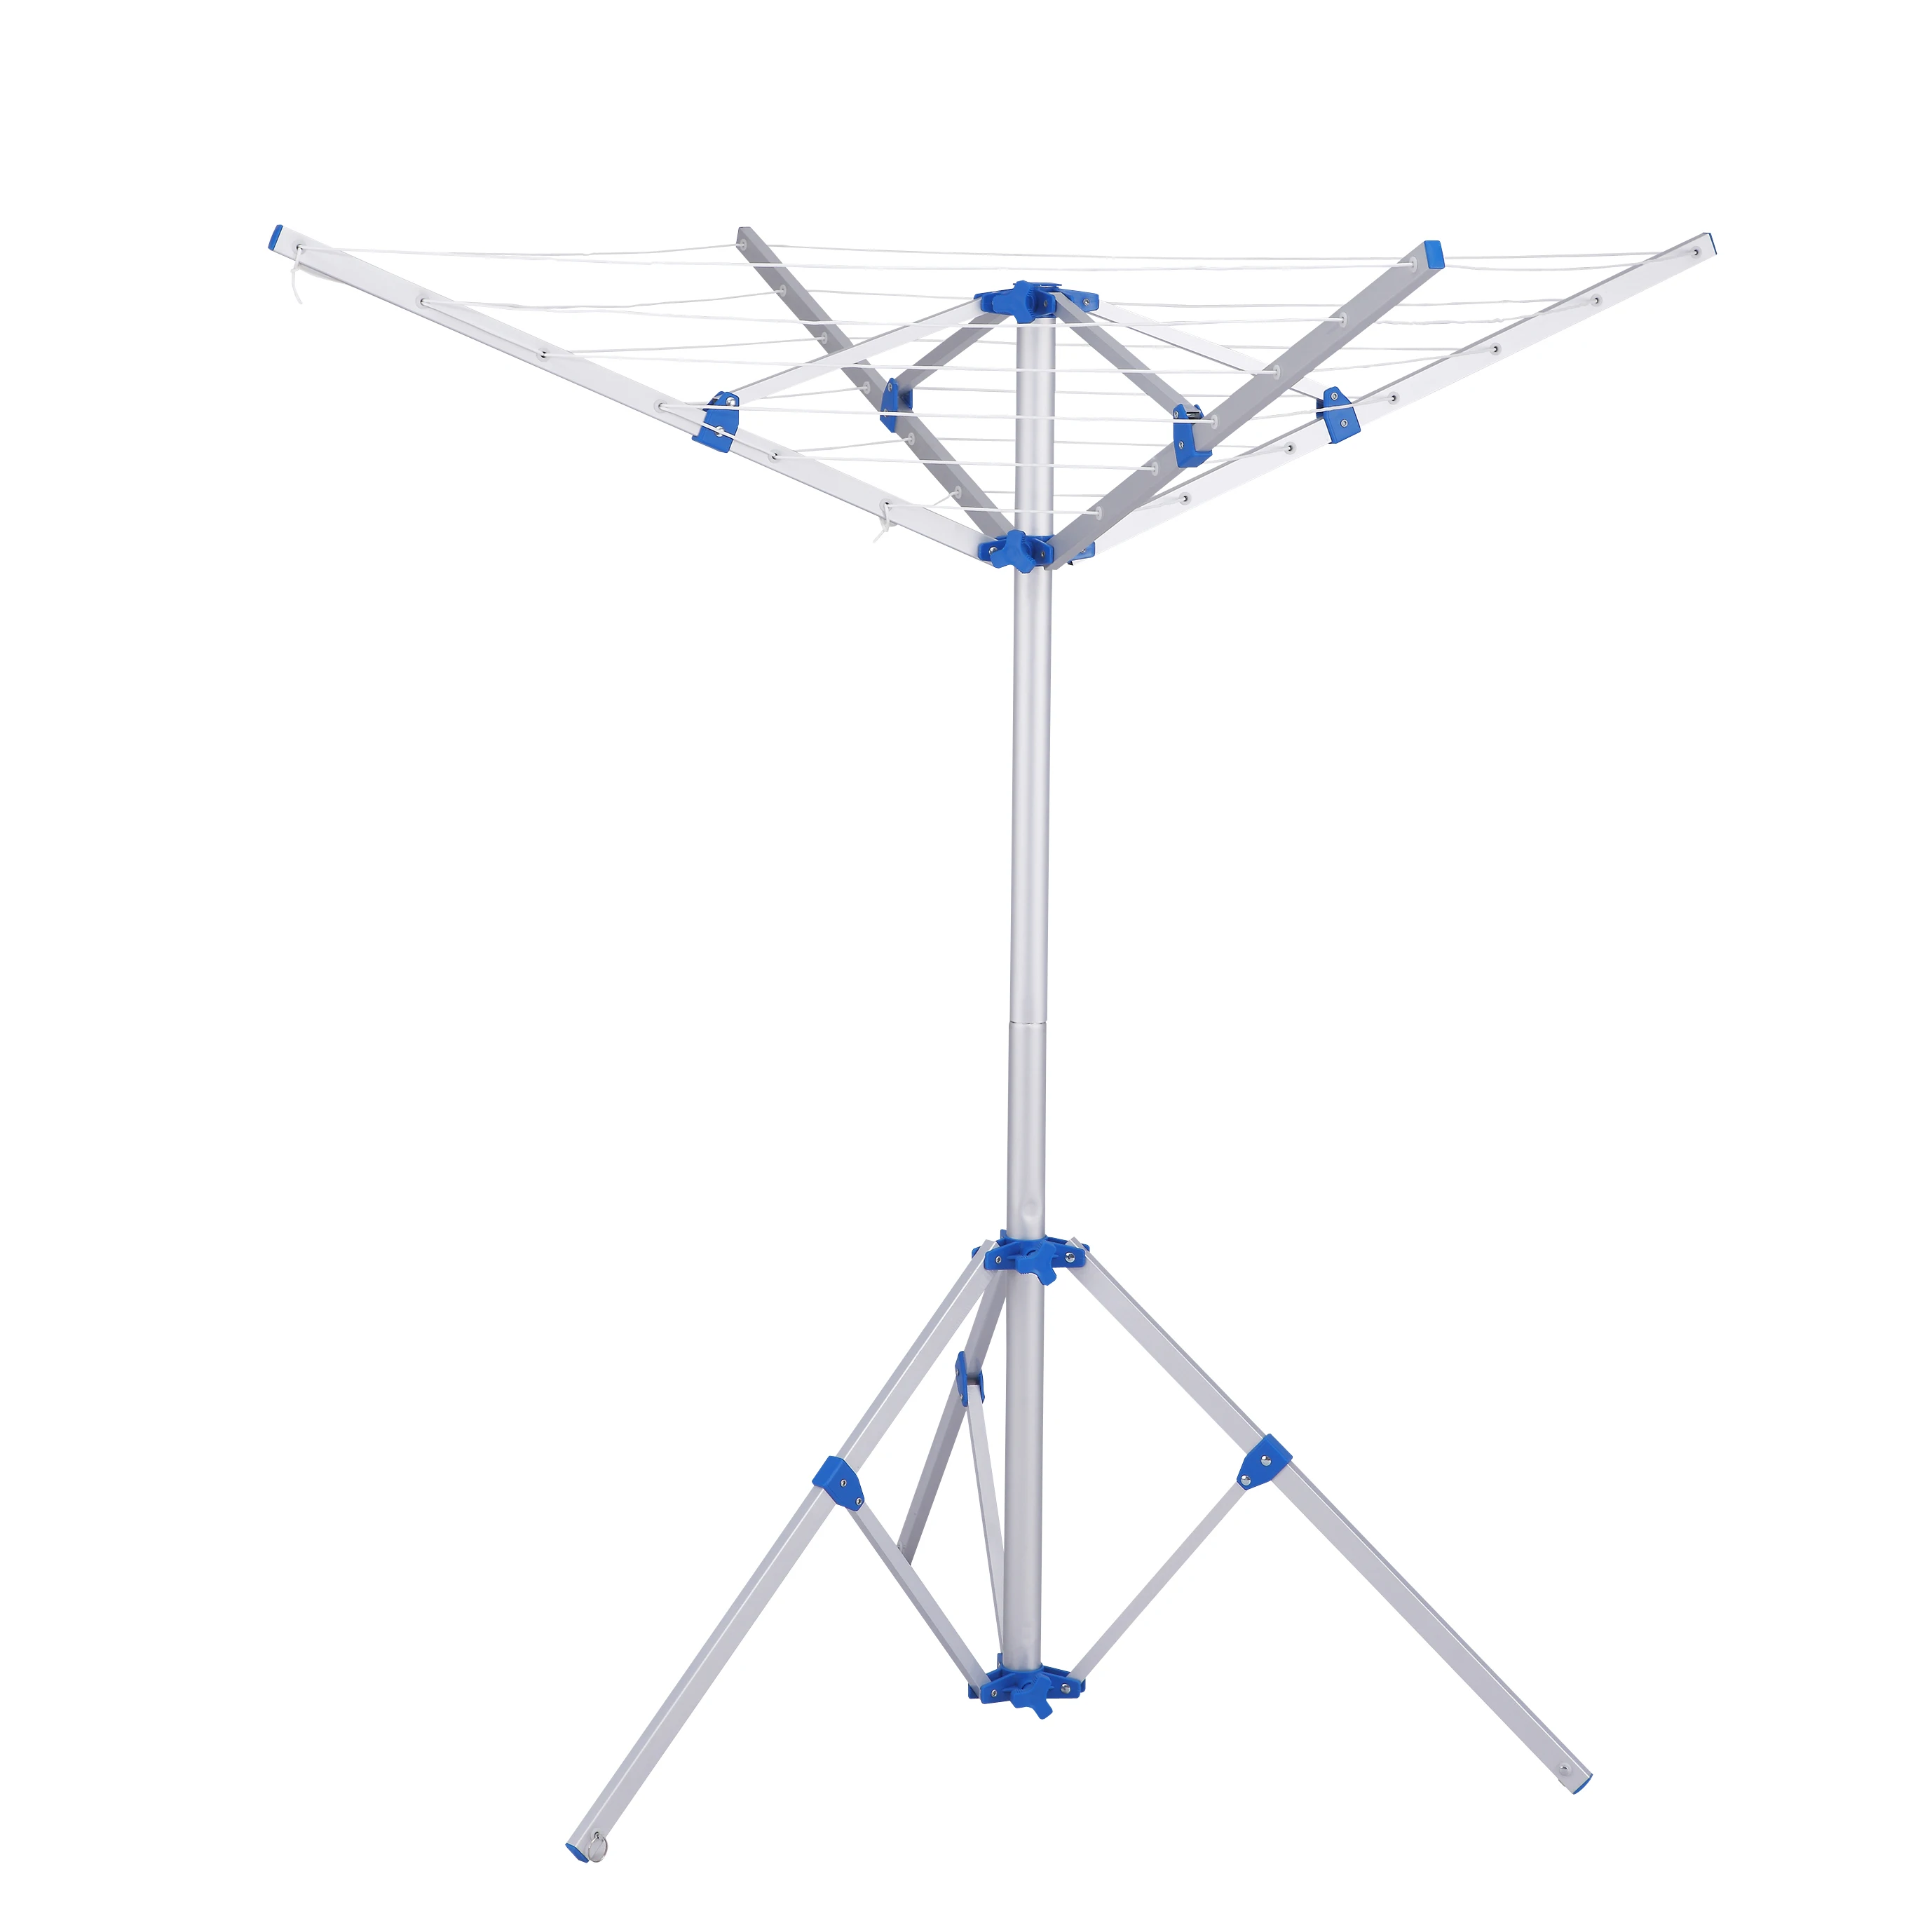 4 Arms and 3 Legs Folding Clothes Airer Portable Indoor Outdoor Dryer Washing Line Free Standing Laundry Clothes Line with Tripod Stand lyrlody Rotary Washing Line 